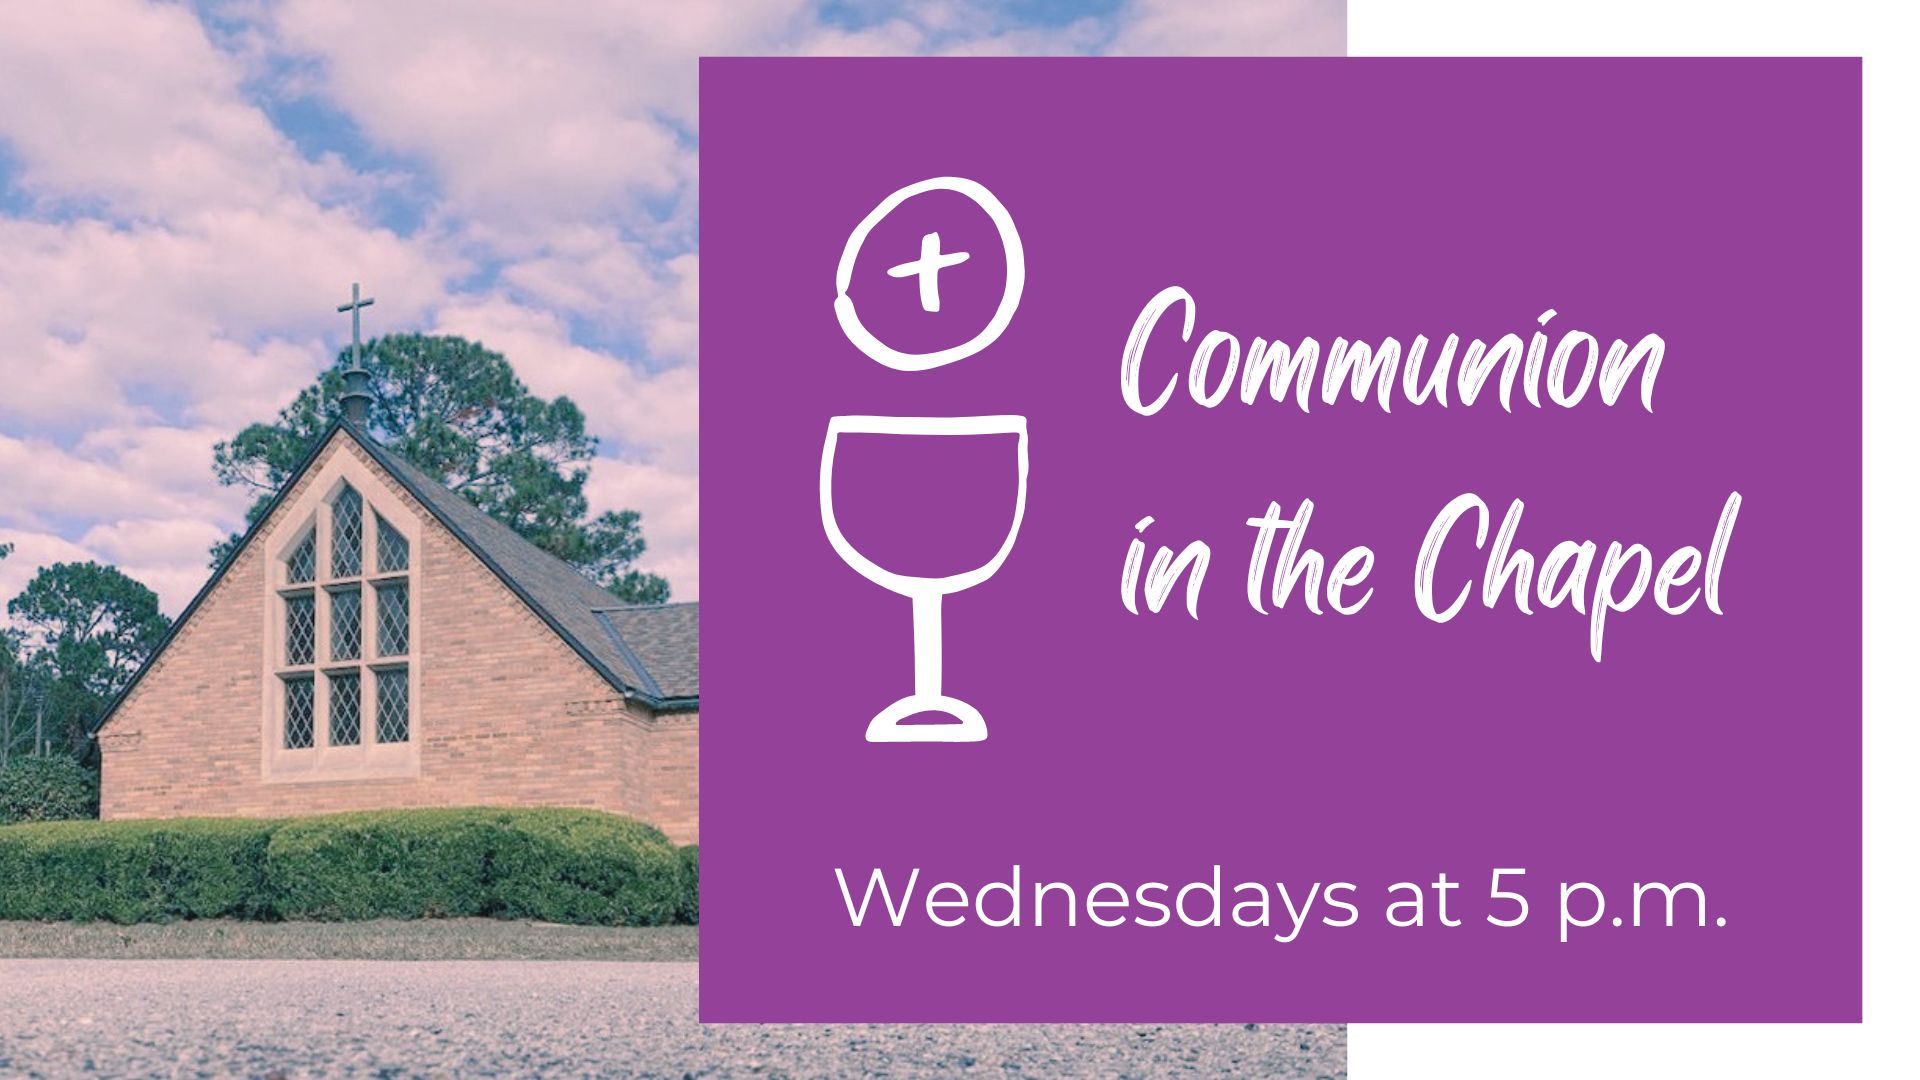 Join us for communion on Wednesdays at 5